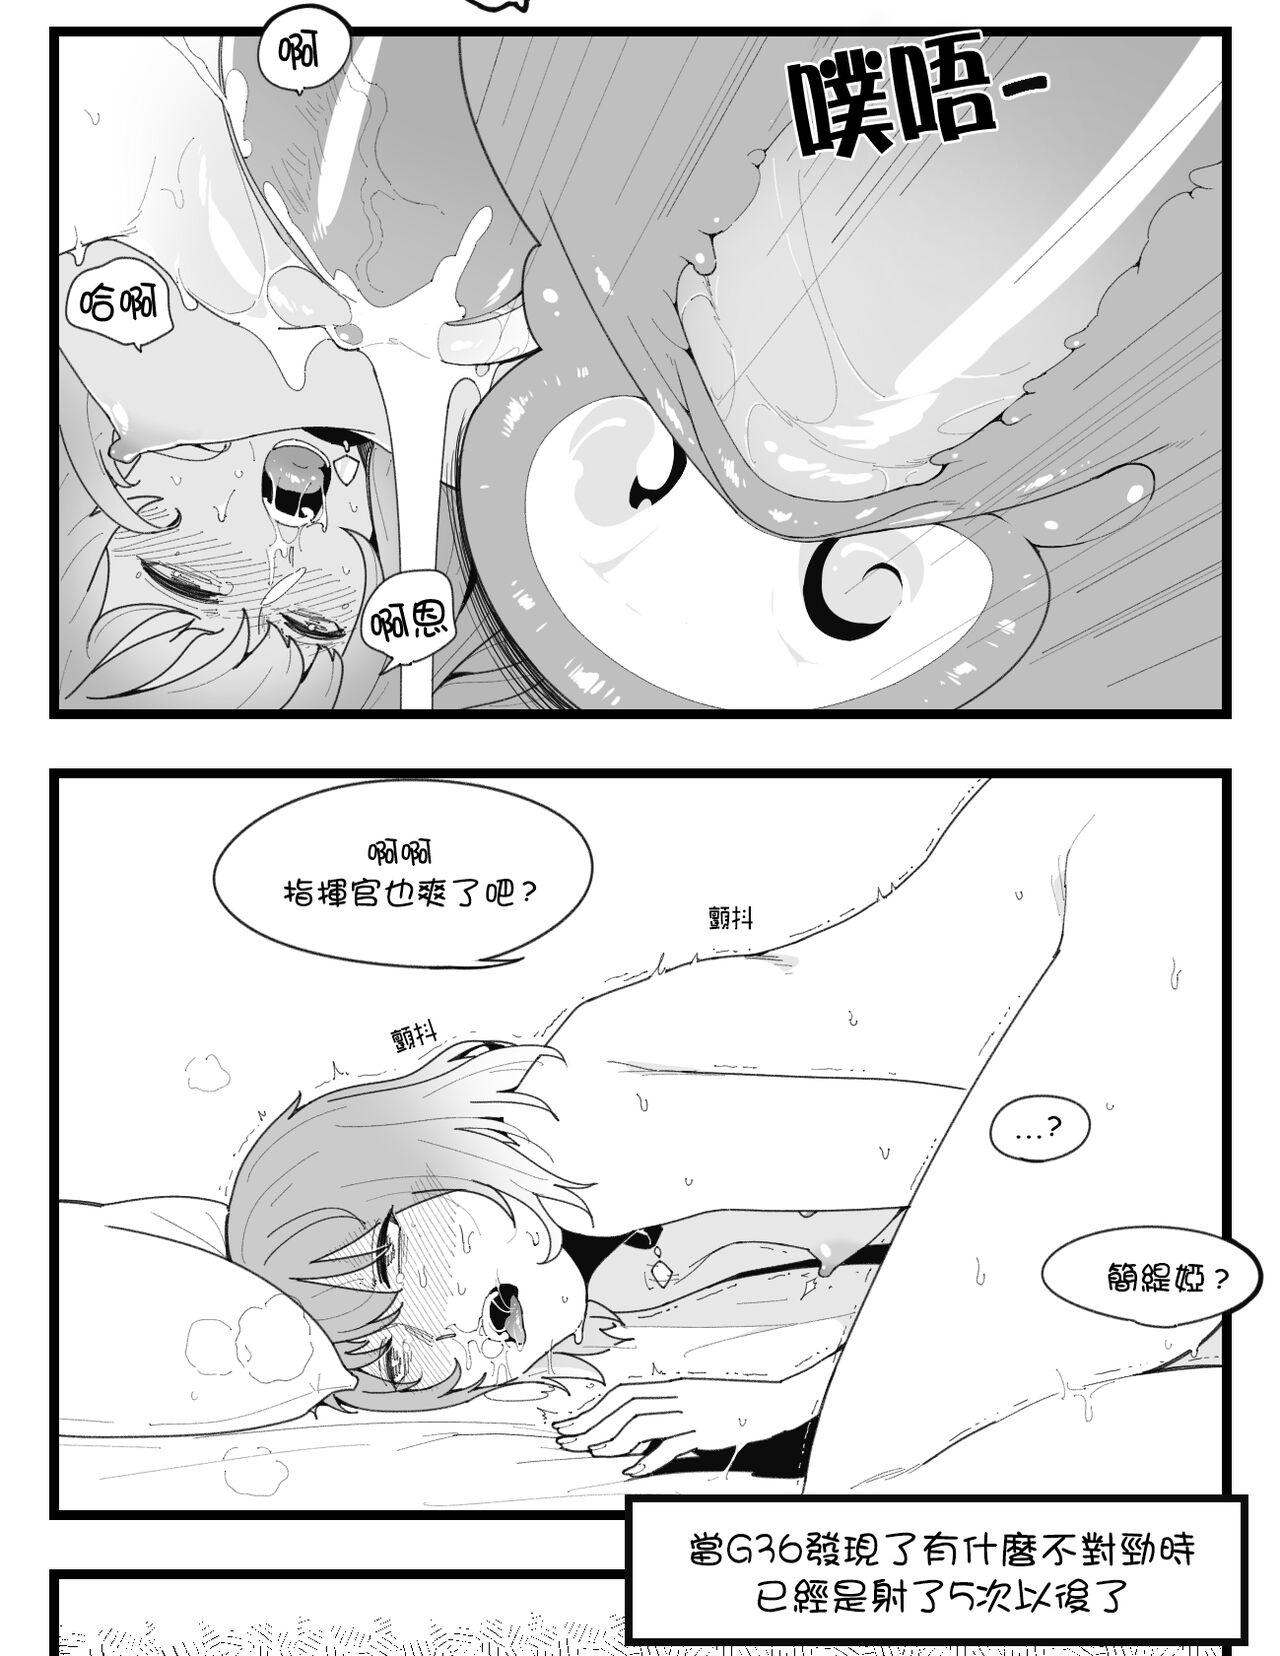 Amatoriale Gentiane x G36 part1~3 - Girls frontline Indonesian - Page 9